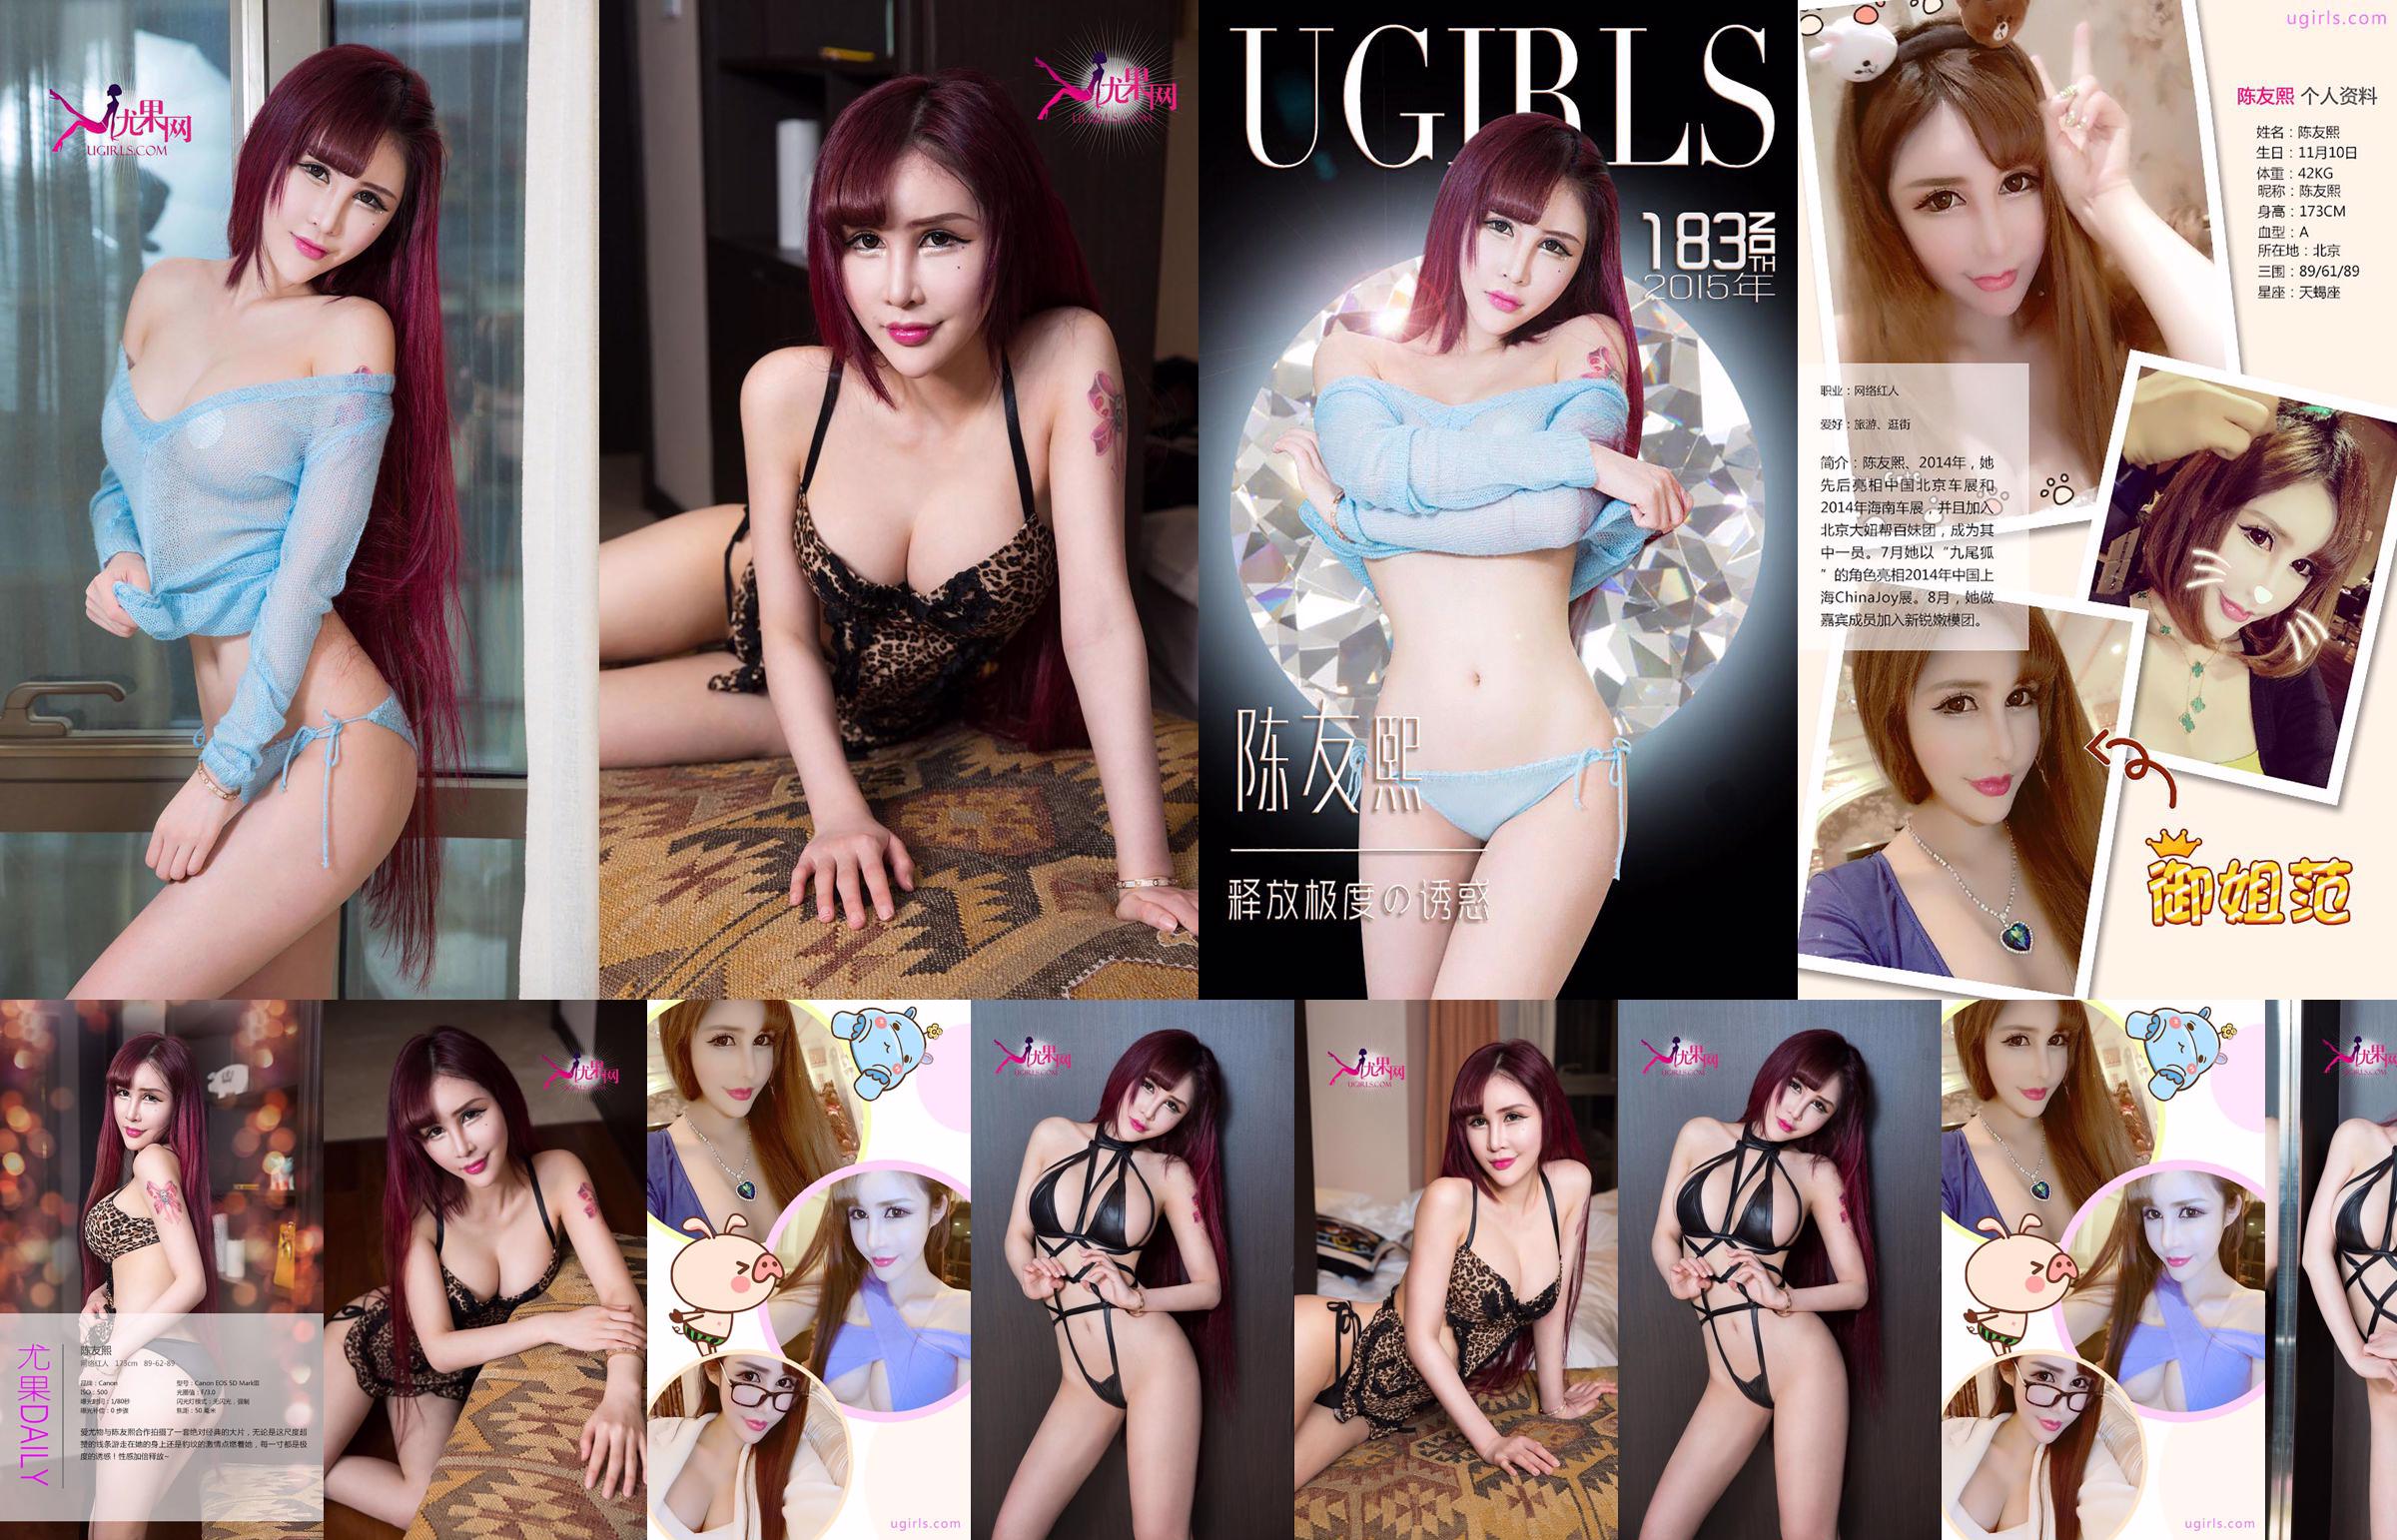 Chen Youxi "Release the Temptation of Jealousy" [爱优物Ugirls] No.183 No.8fdee9 Page 1